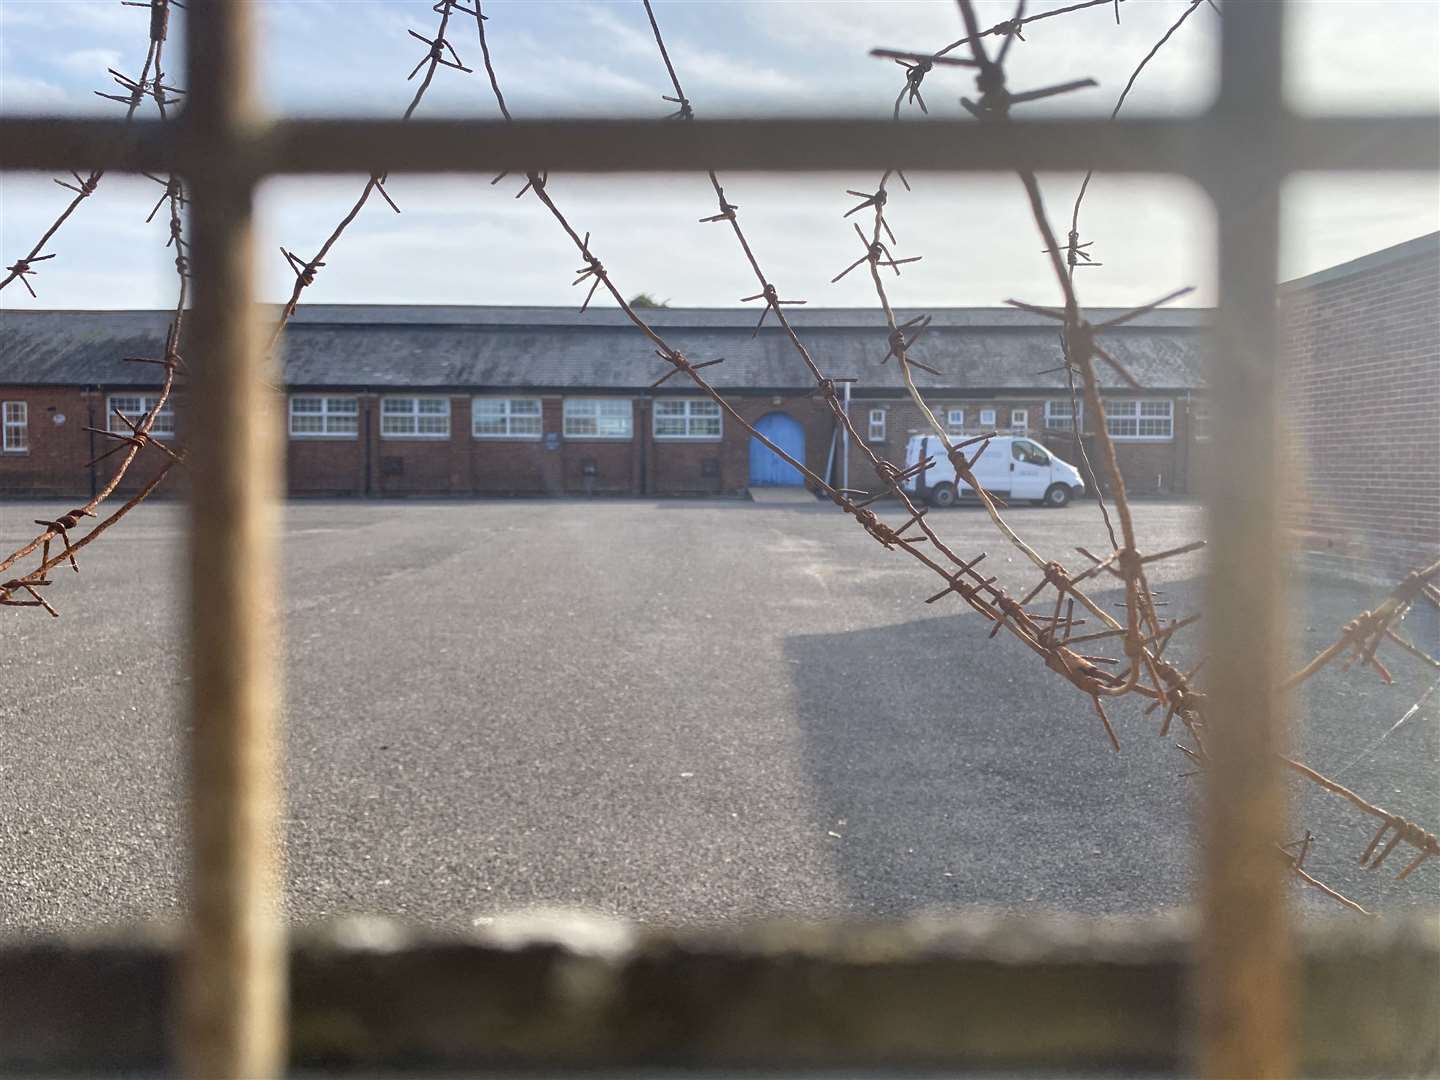 Napier Barracks in Folkestone has been used to house asylum seekers for six months now